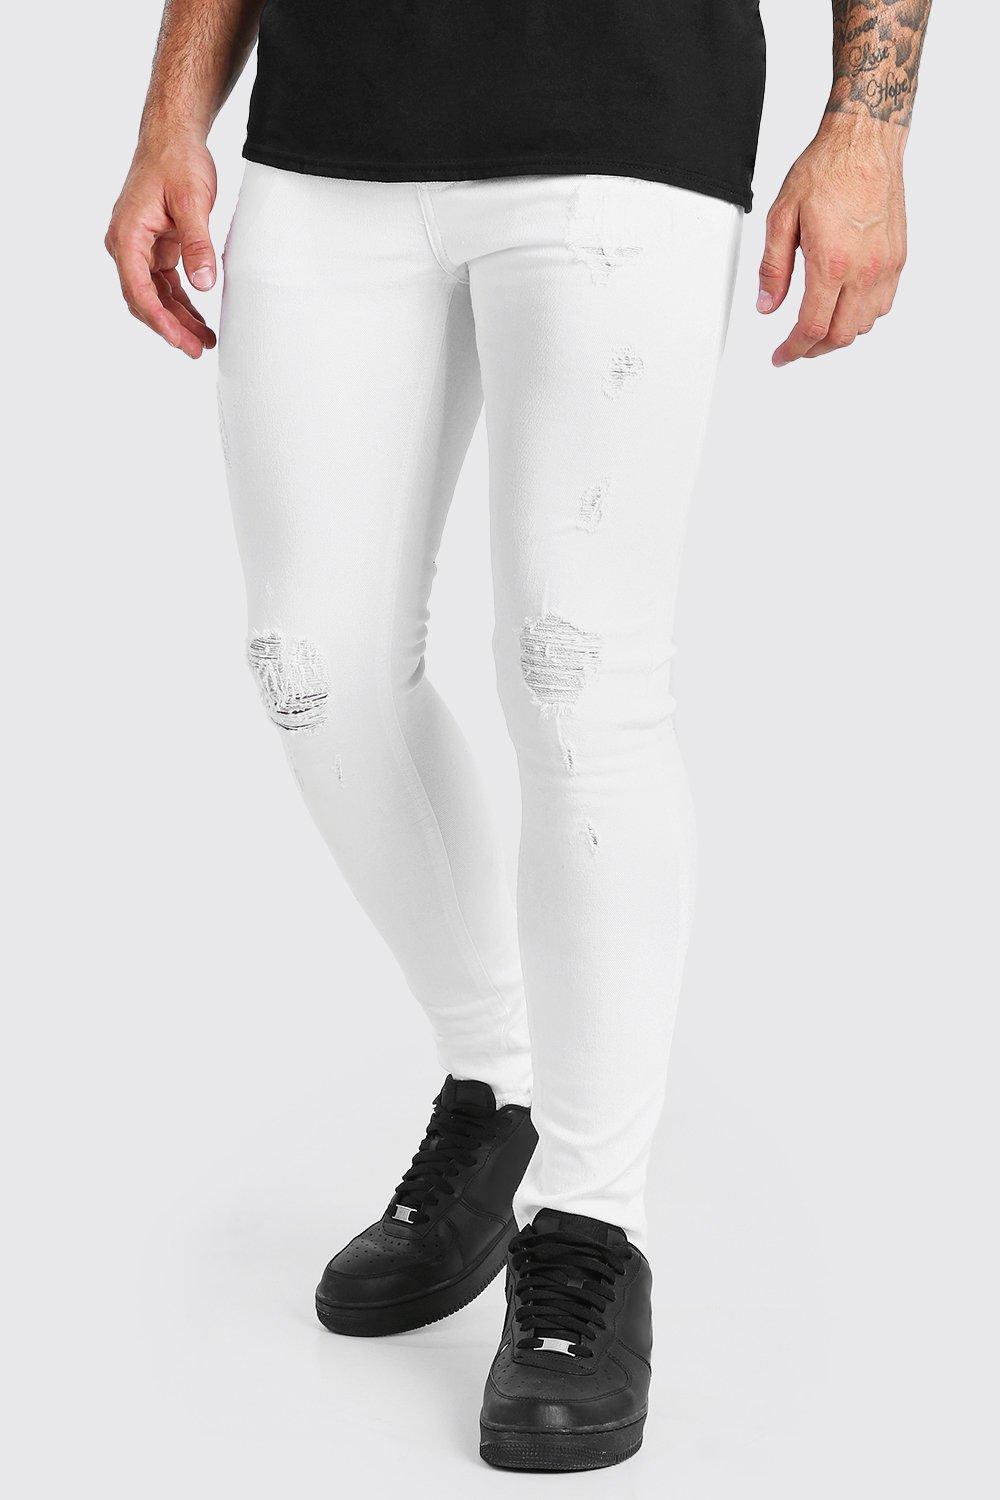 white super skinny ripped jeans